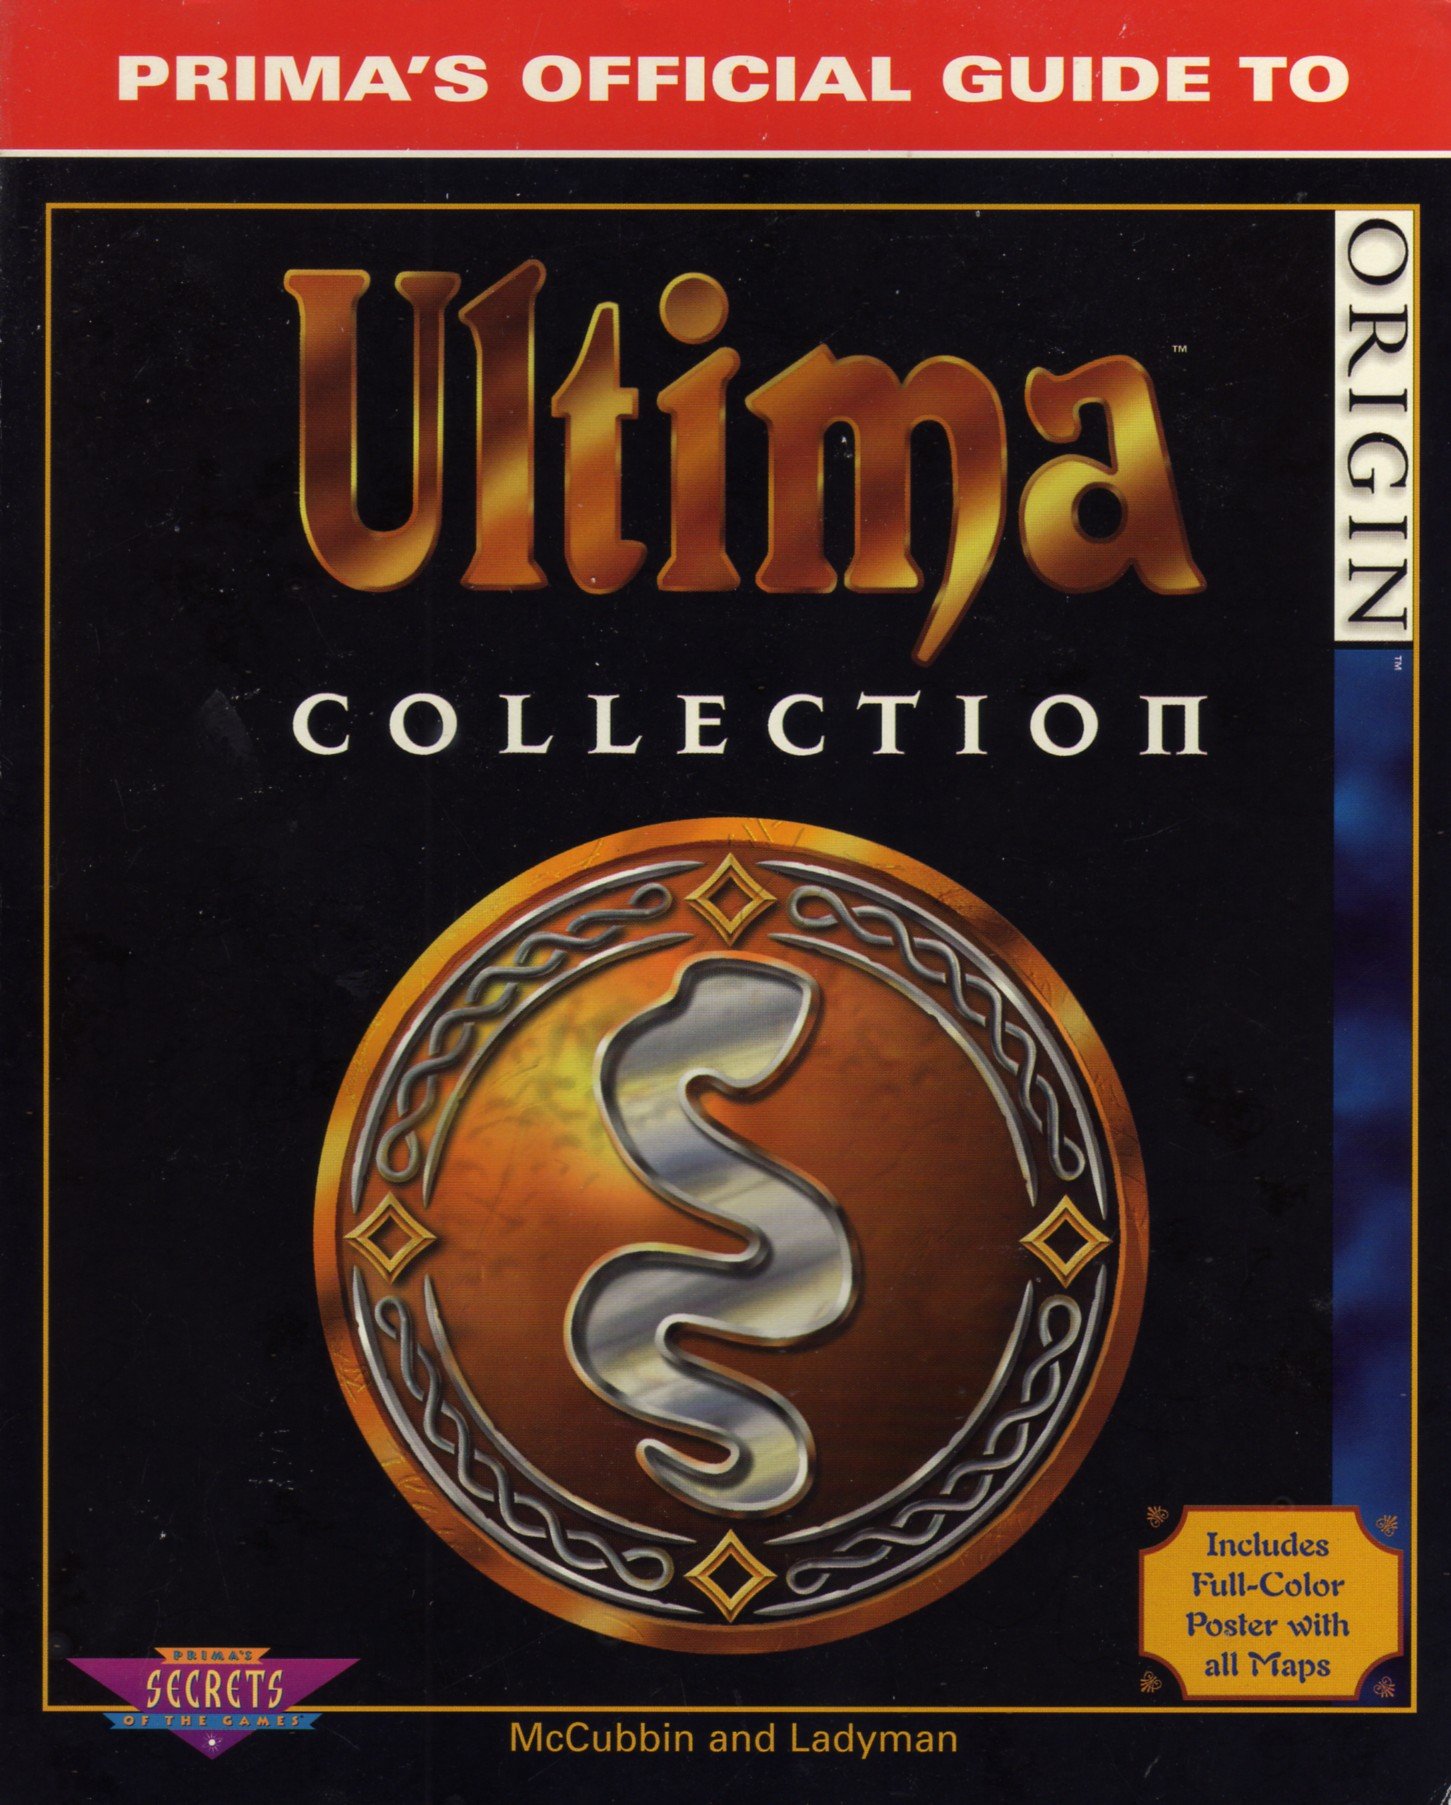 More information about "Prima's Official Guide to the Ultima Collection"